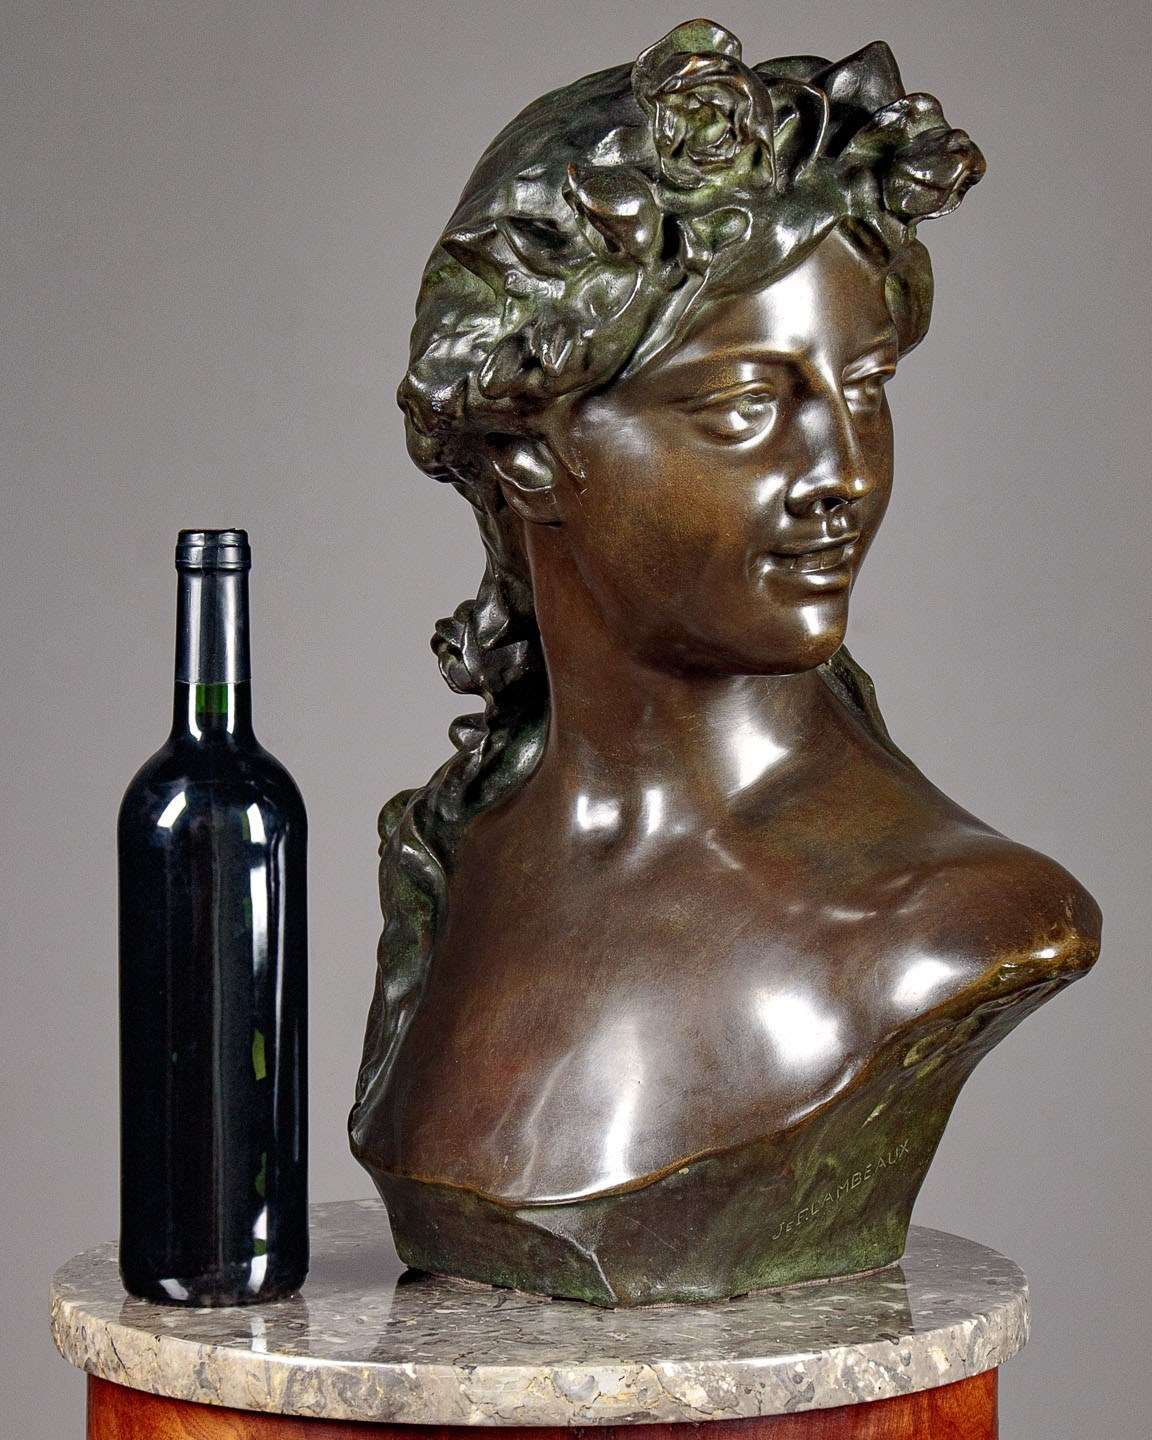 JEF LAMBEAUX, Large Bust (29 inch) of a Naked Woman Sculpture in